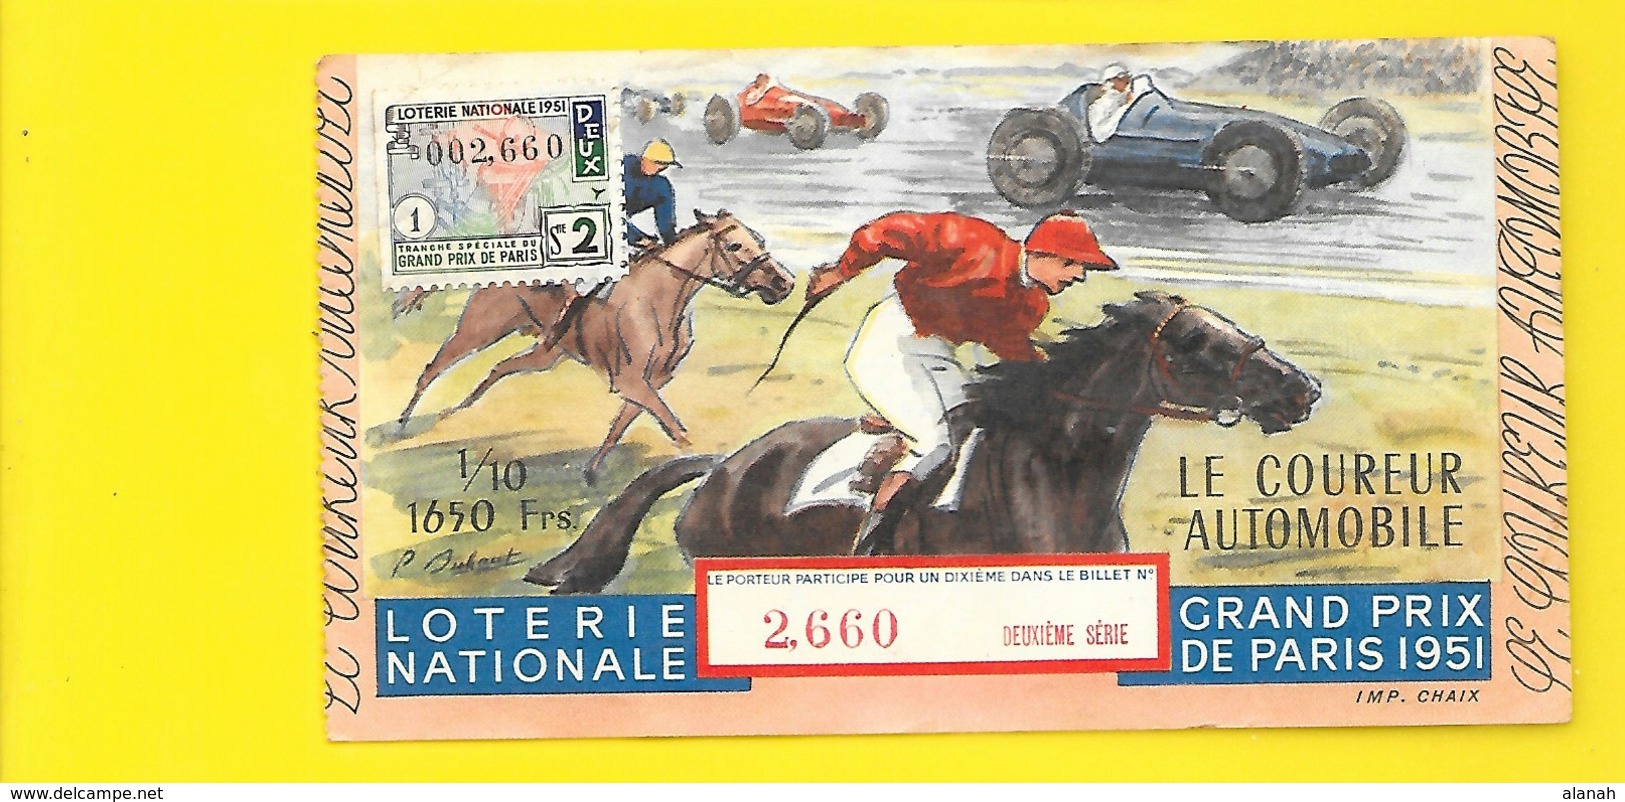 1/10 1951 Le Coureur Automobile Lotere Nationale - Lottery Tickets